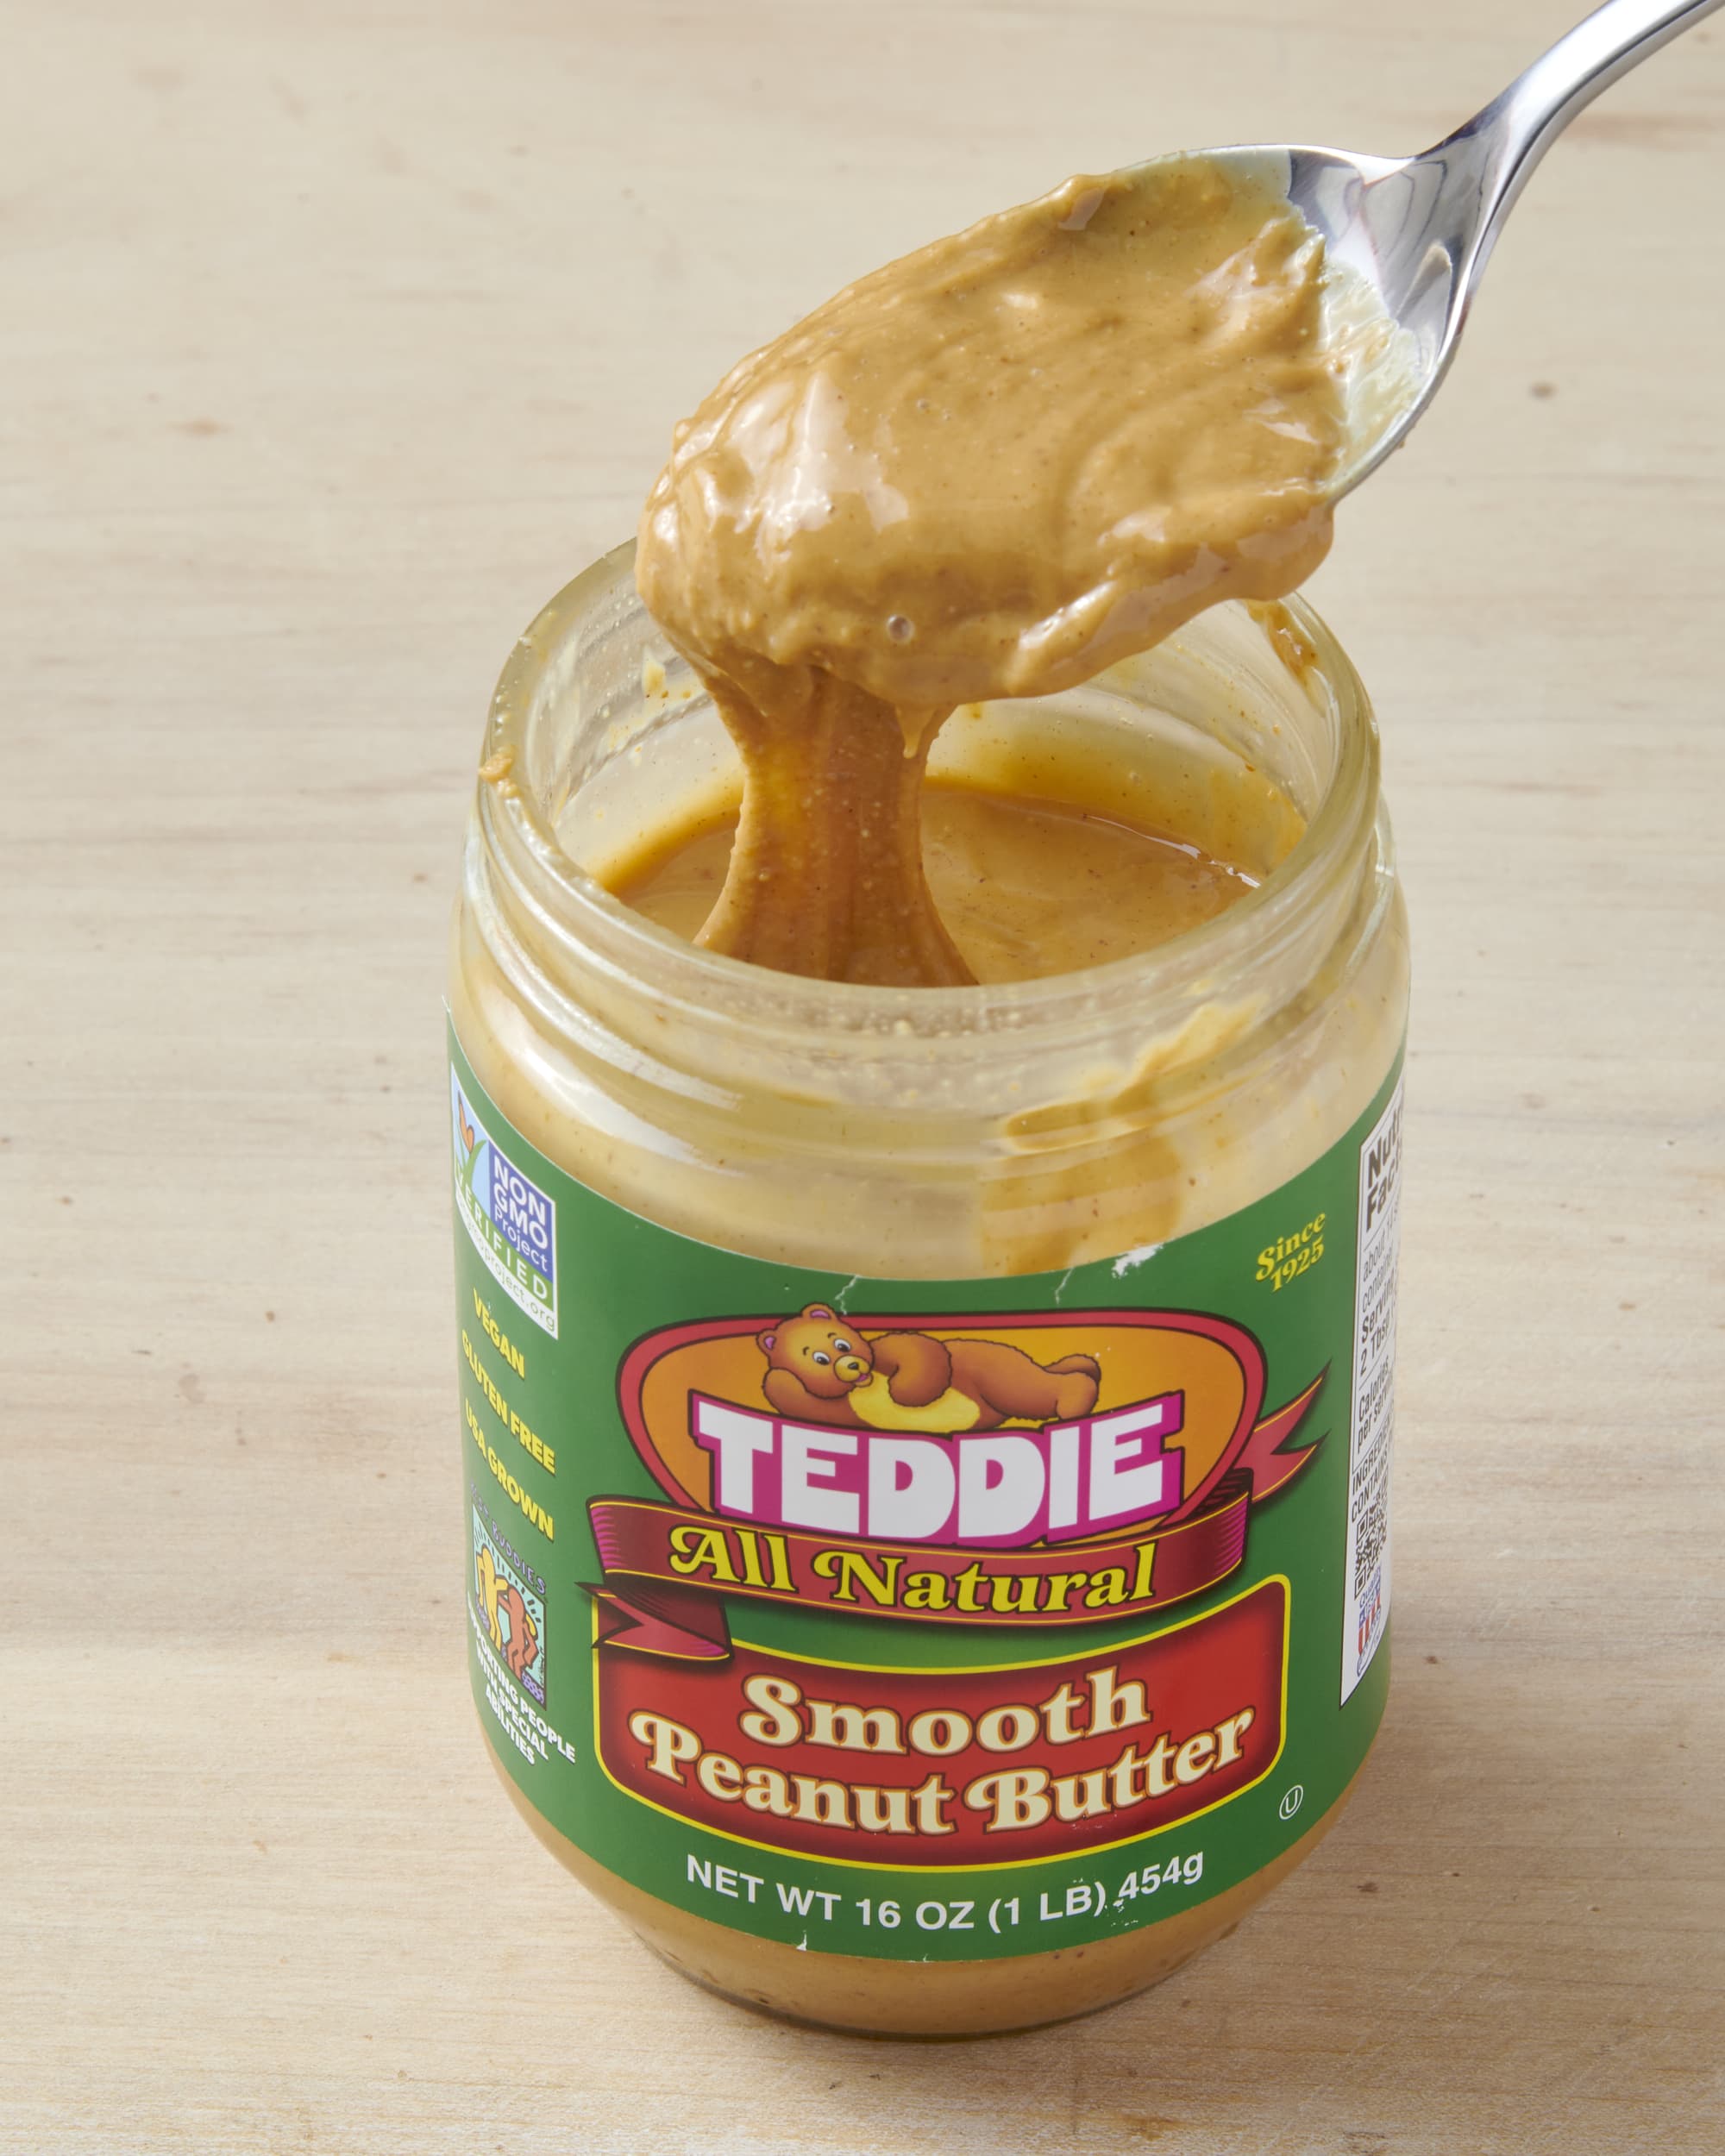 We Tried 11 Peanut Butters To Find the Best Brand